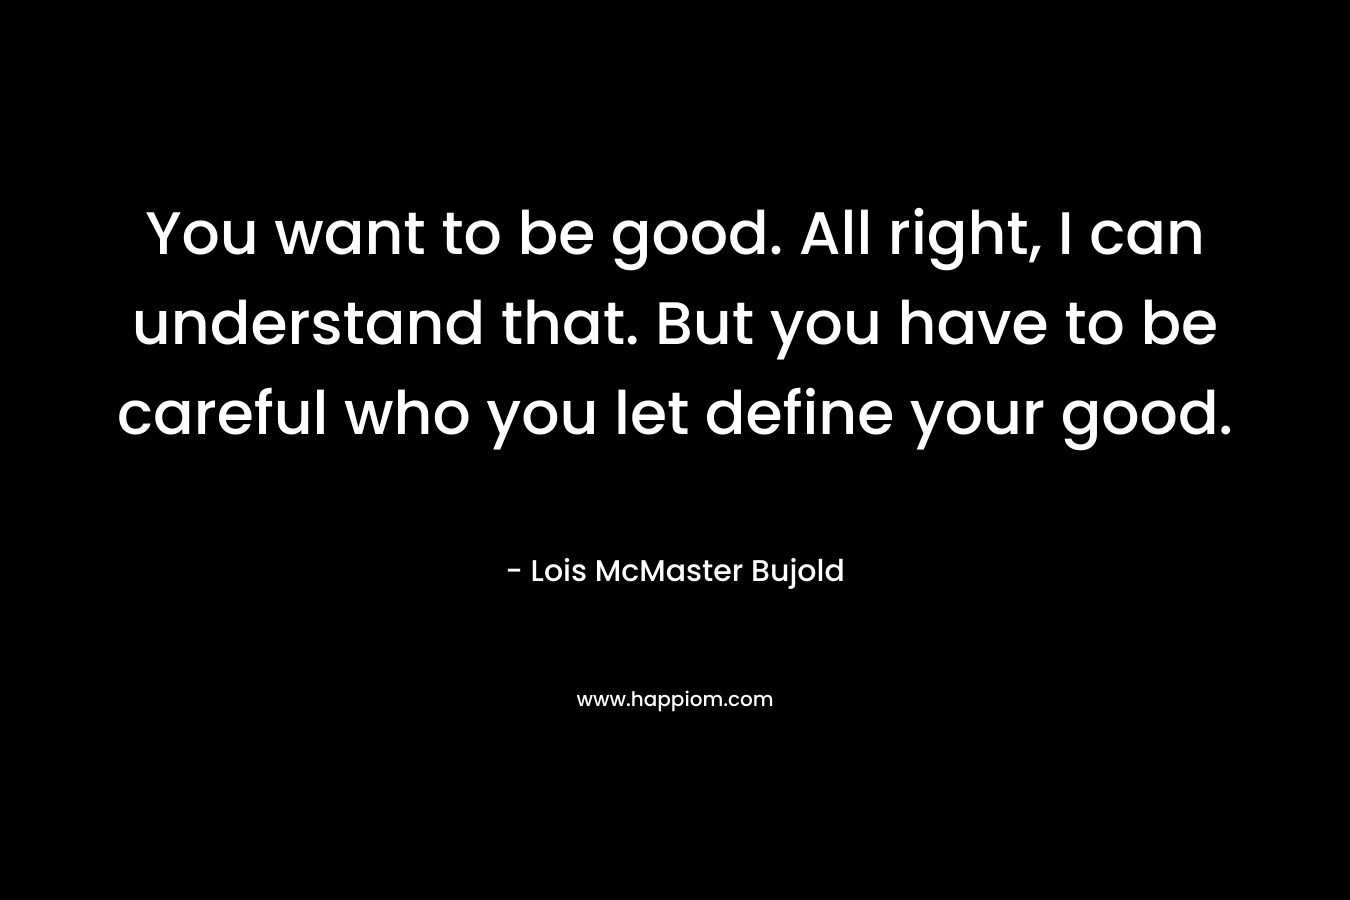 You want to be good. All right, I can understand that. But you have to be careful who you let define your good.